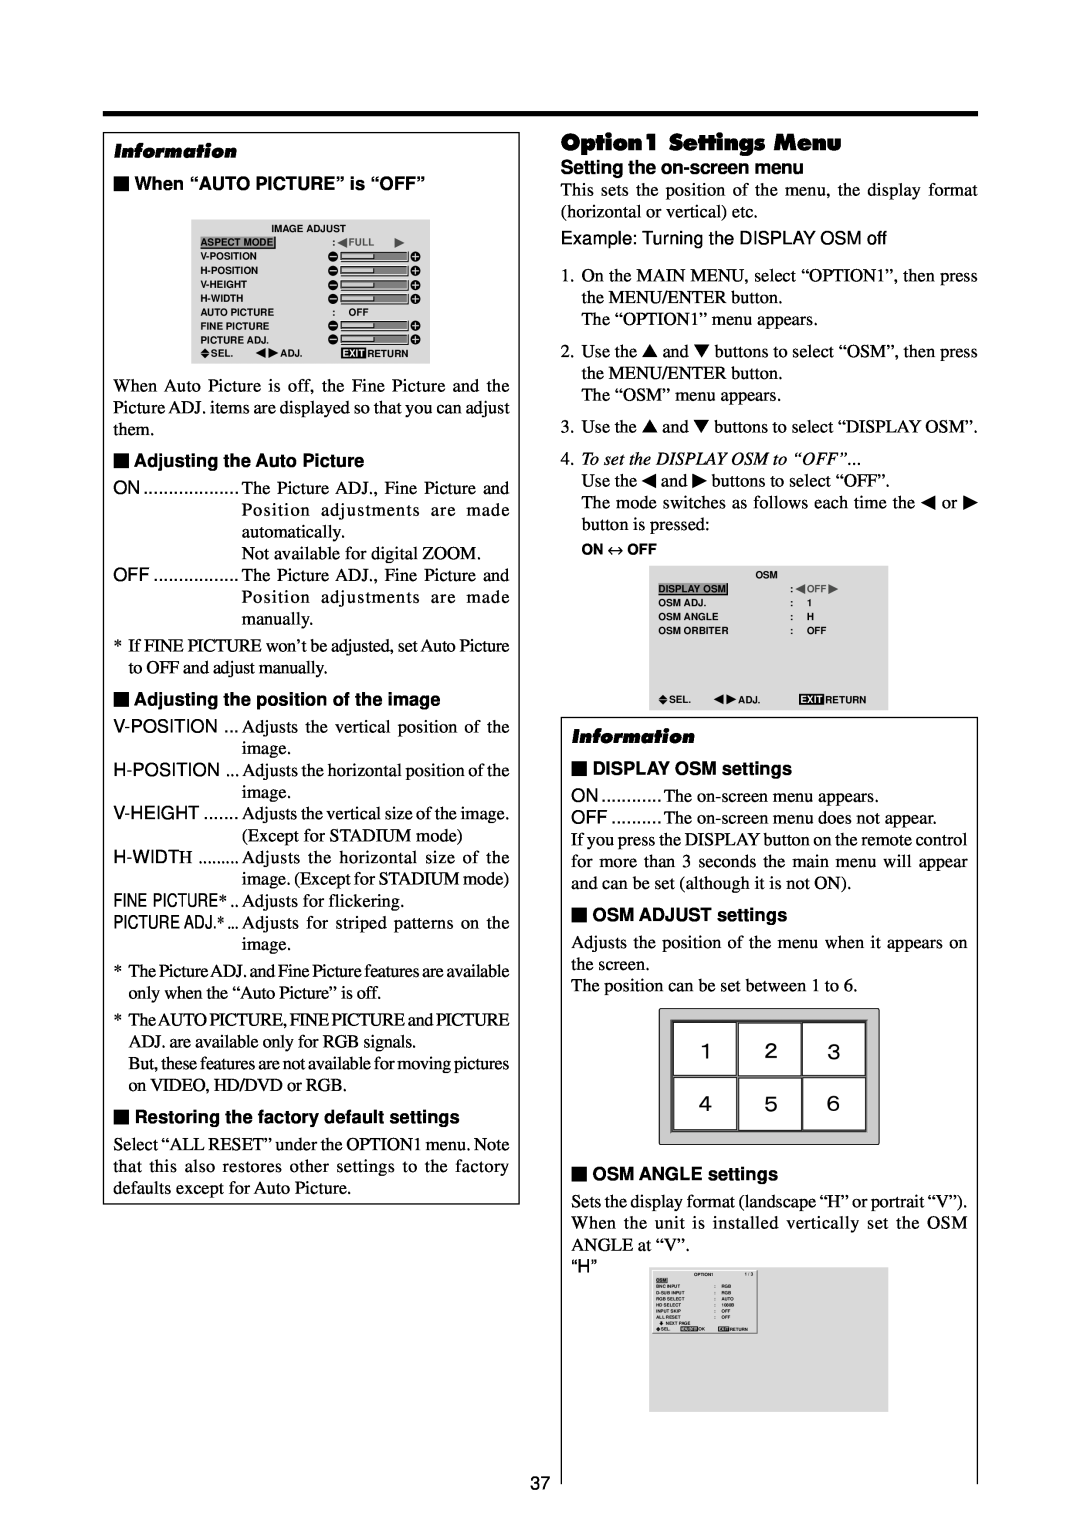 Runco PL-61CX manual Option1 Settings Menu, Setting the on-screen menu, Information,  When “ AUTO PICTURE” is “ OFF” 